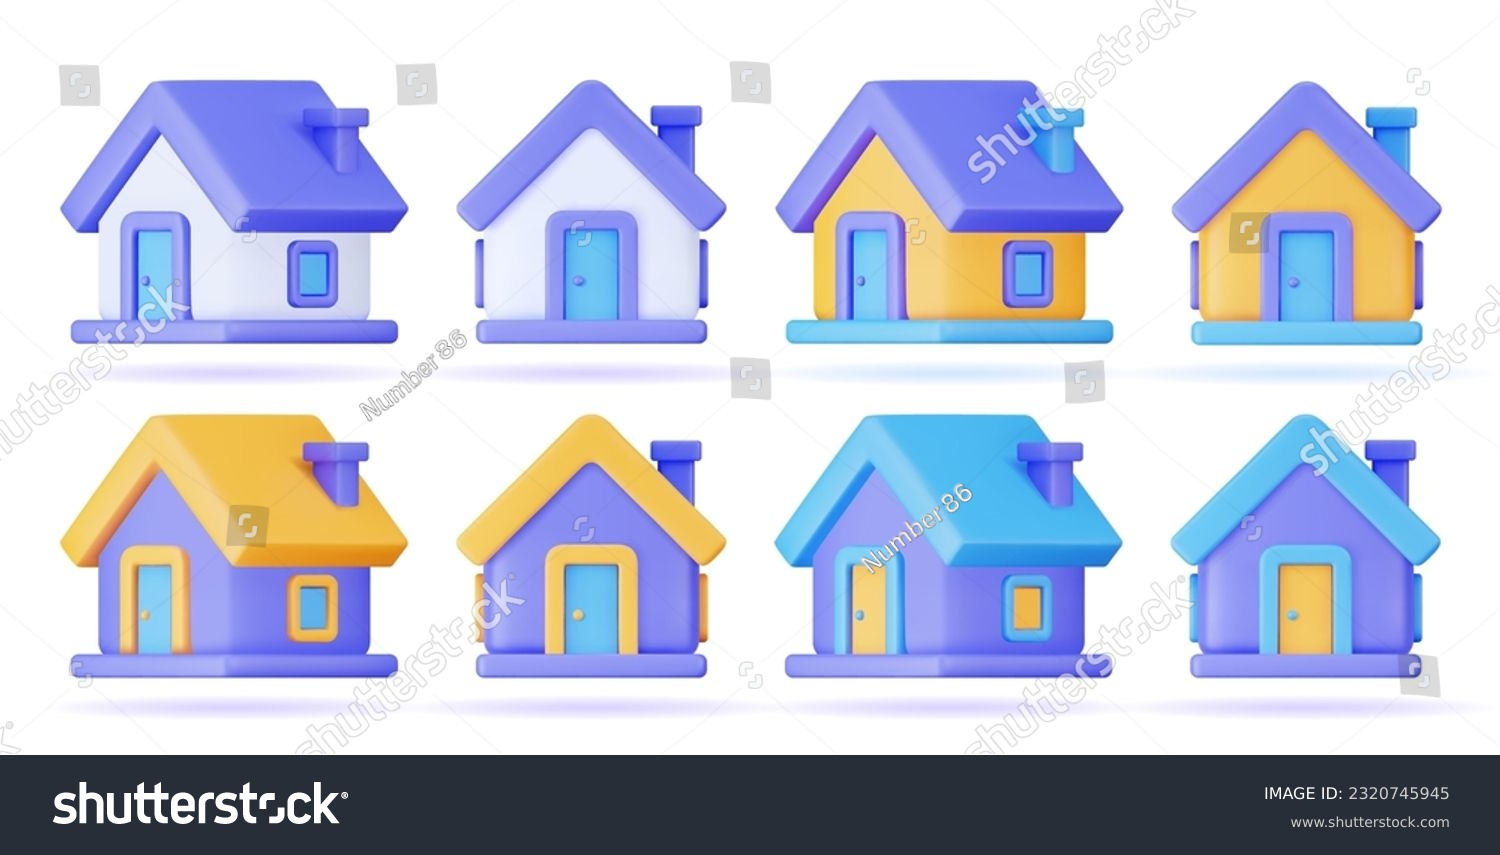 SVG of Home 3d vector in a minimalistic style for the interface of applications and web pages. Plastic render of house on isolated white background. 3d cartoon illustration symbol of security and protection. svg